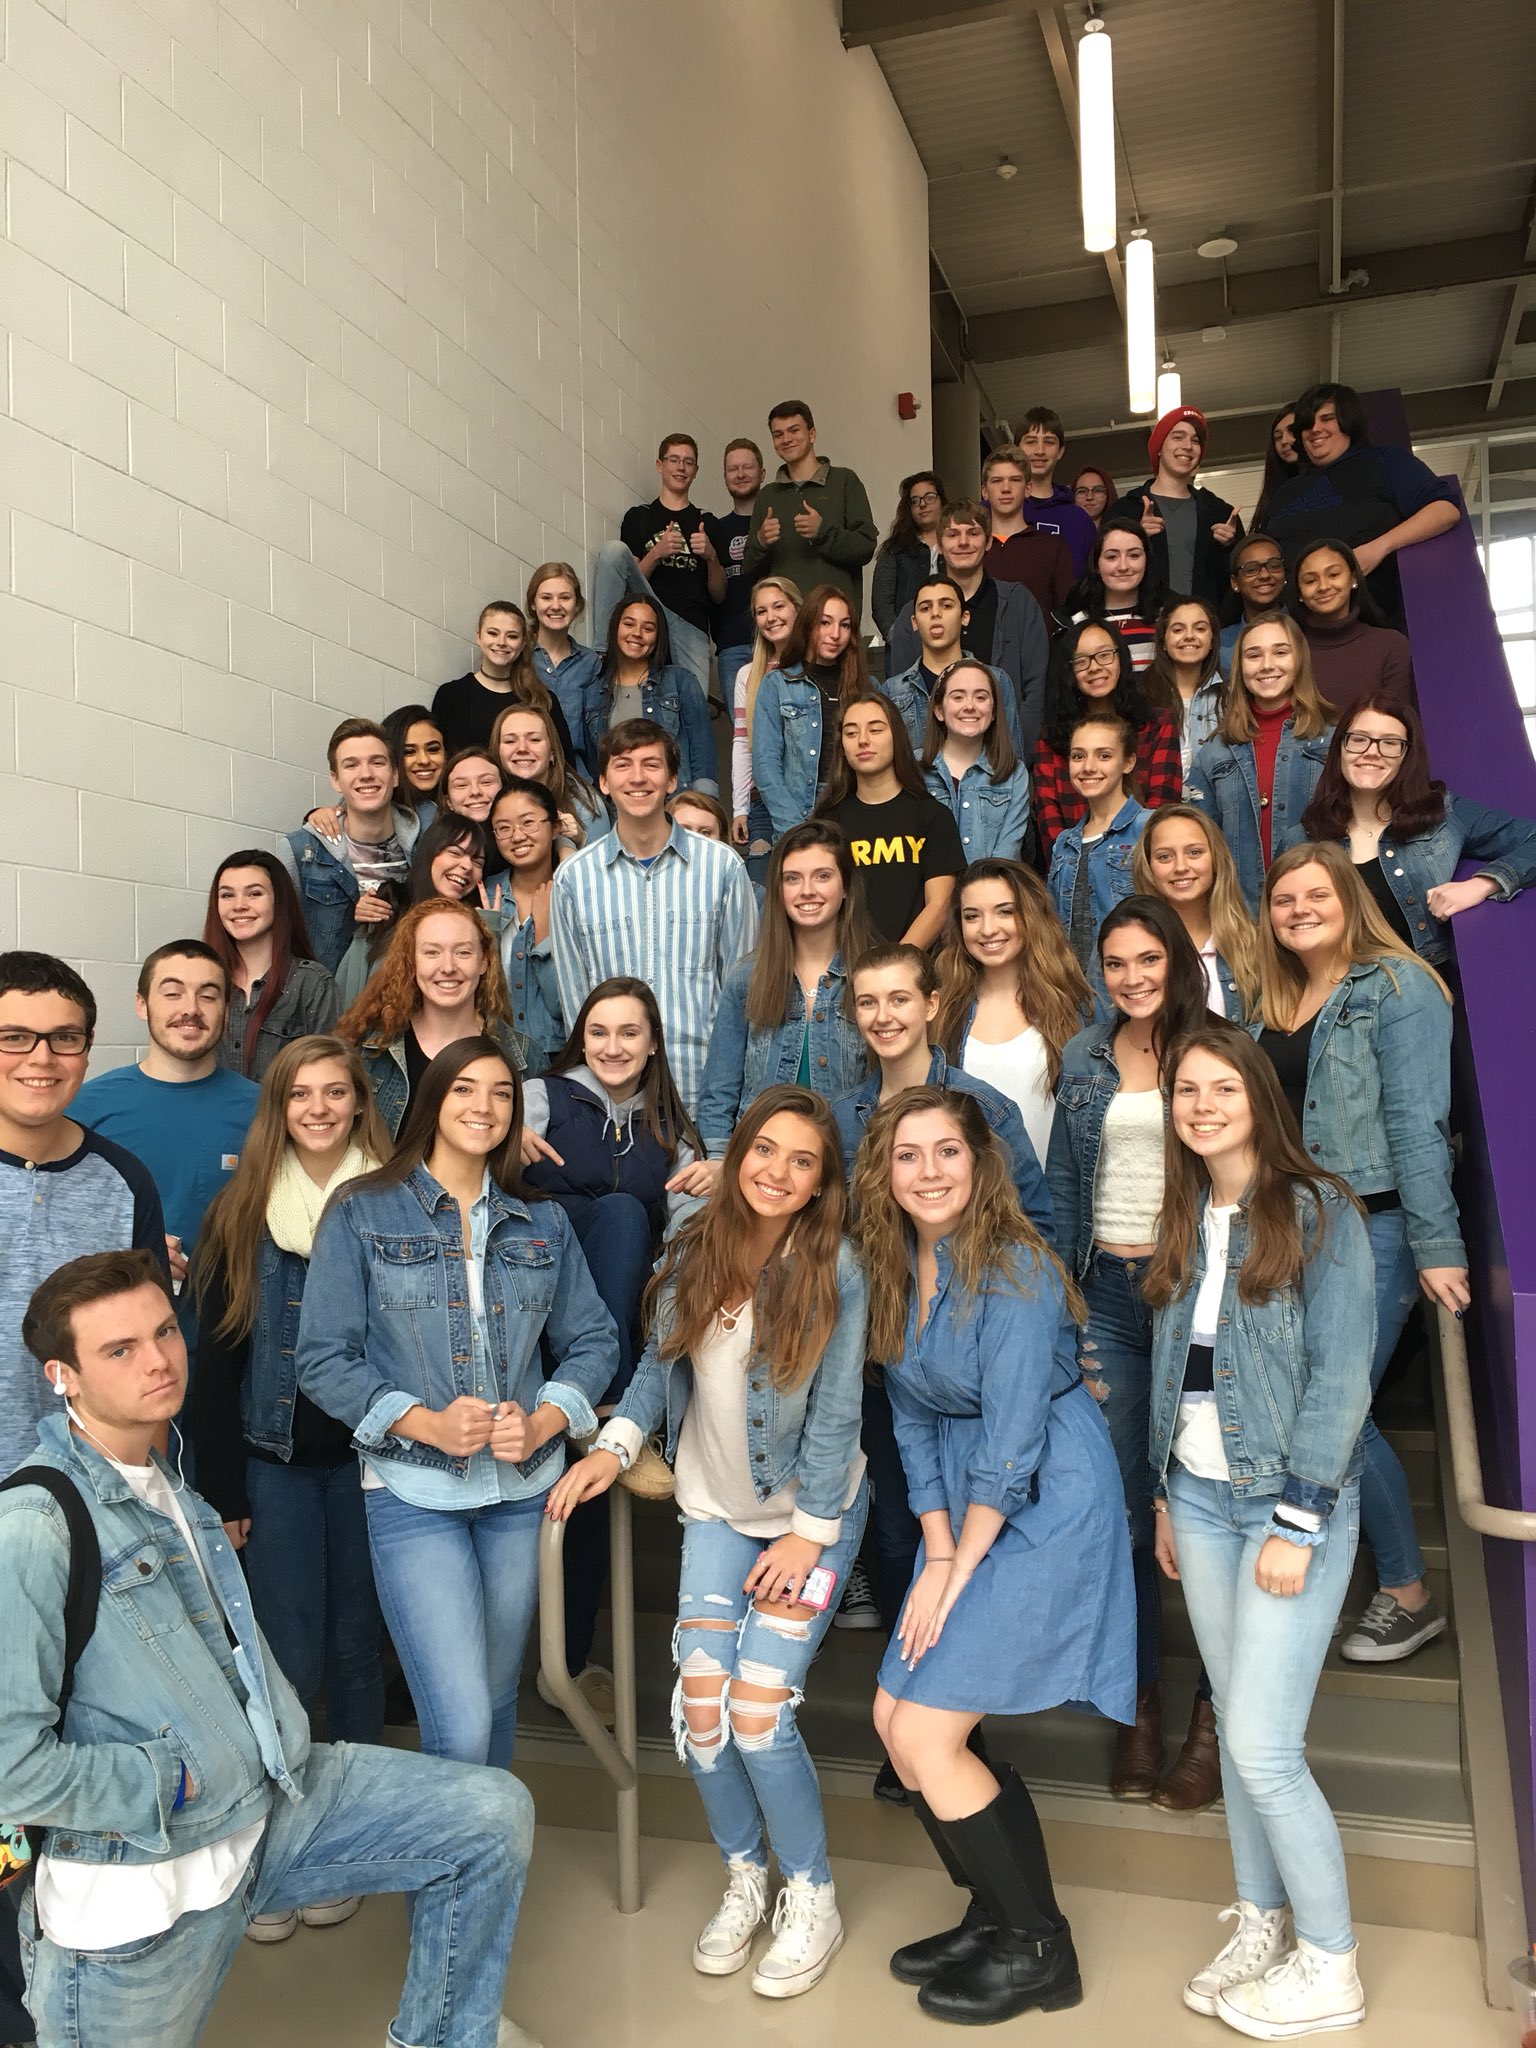 NHS Student Council on Twitter: "Awesome participation for denim day! Let's kick it up tomorrow for tie-dye day! Don't forget to dress up &amp; earn class spirit points! https://t.co/CVVzbRKXyp" / Twitter